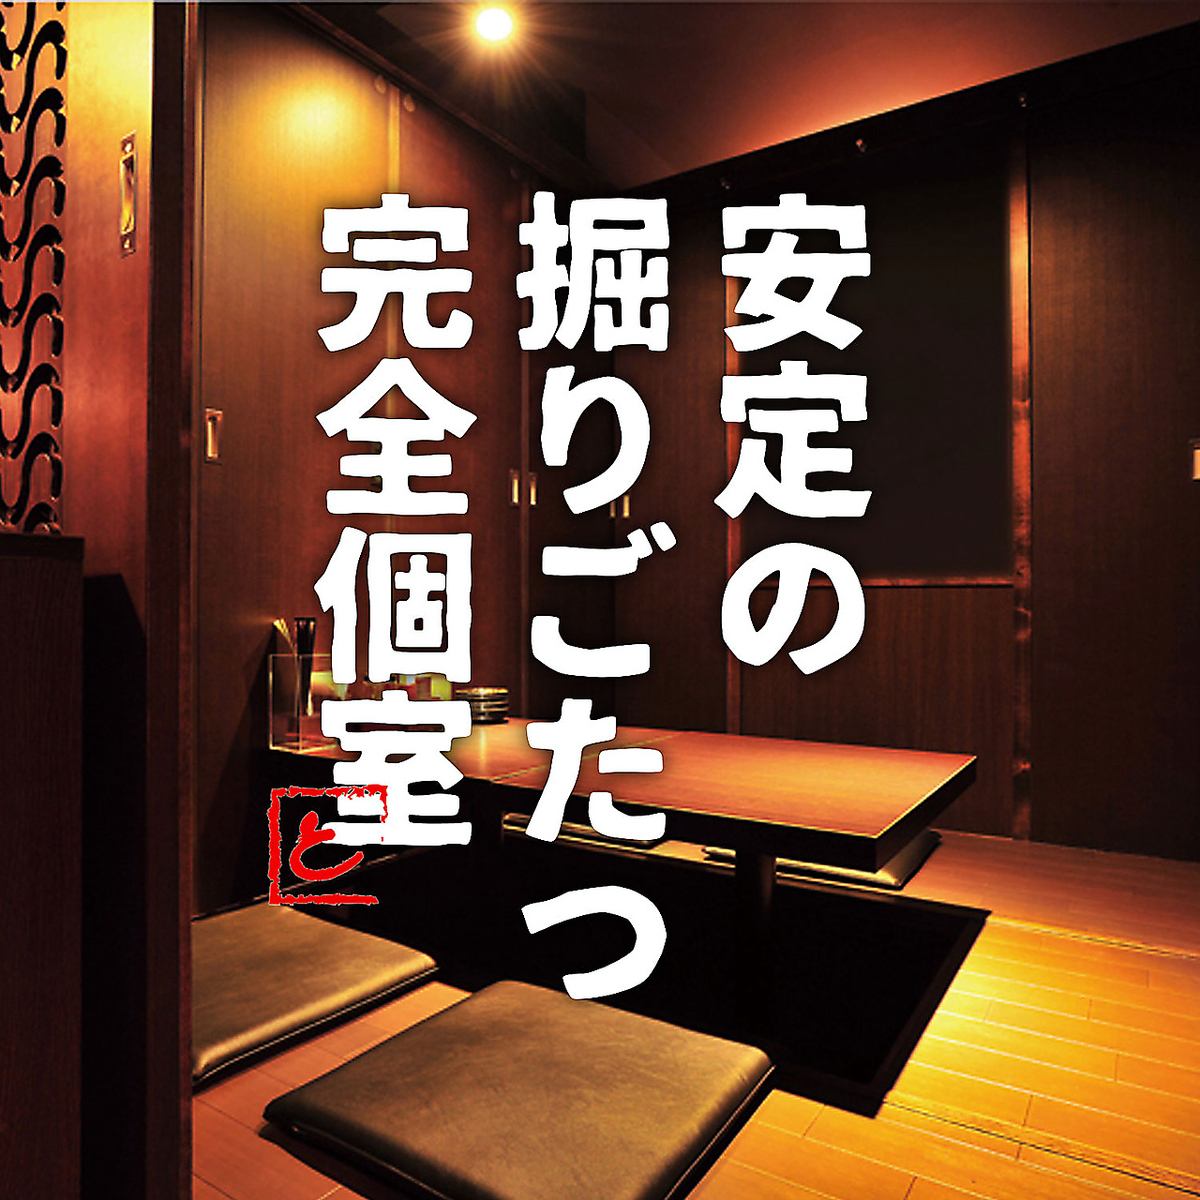 [Completely private room◎] Enjoy a relaxing meal in a private room with a sunken kotatsu ♪